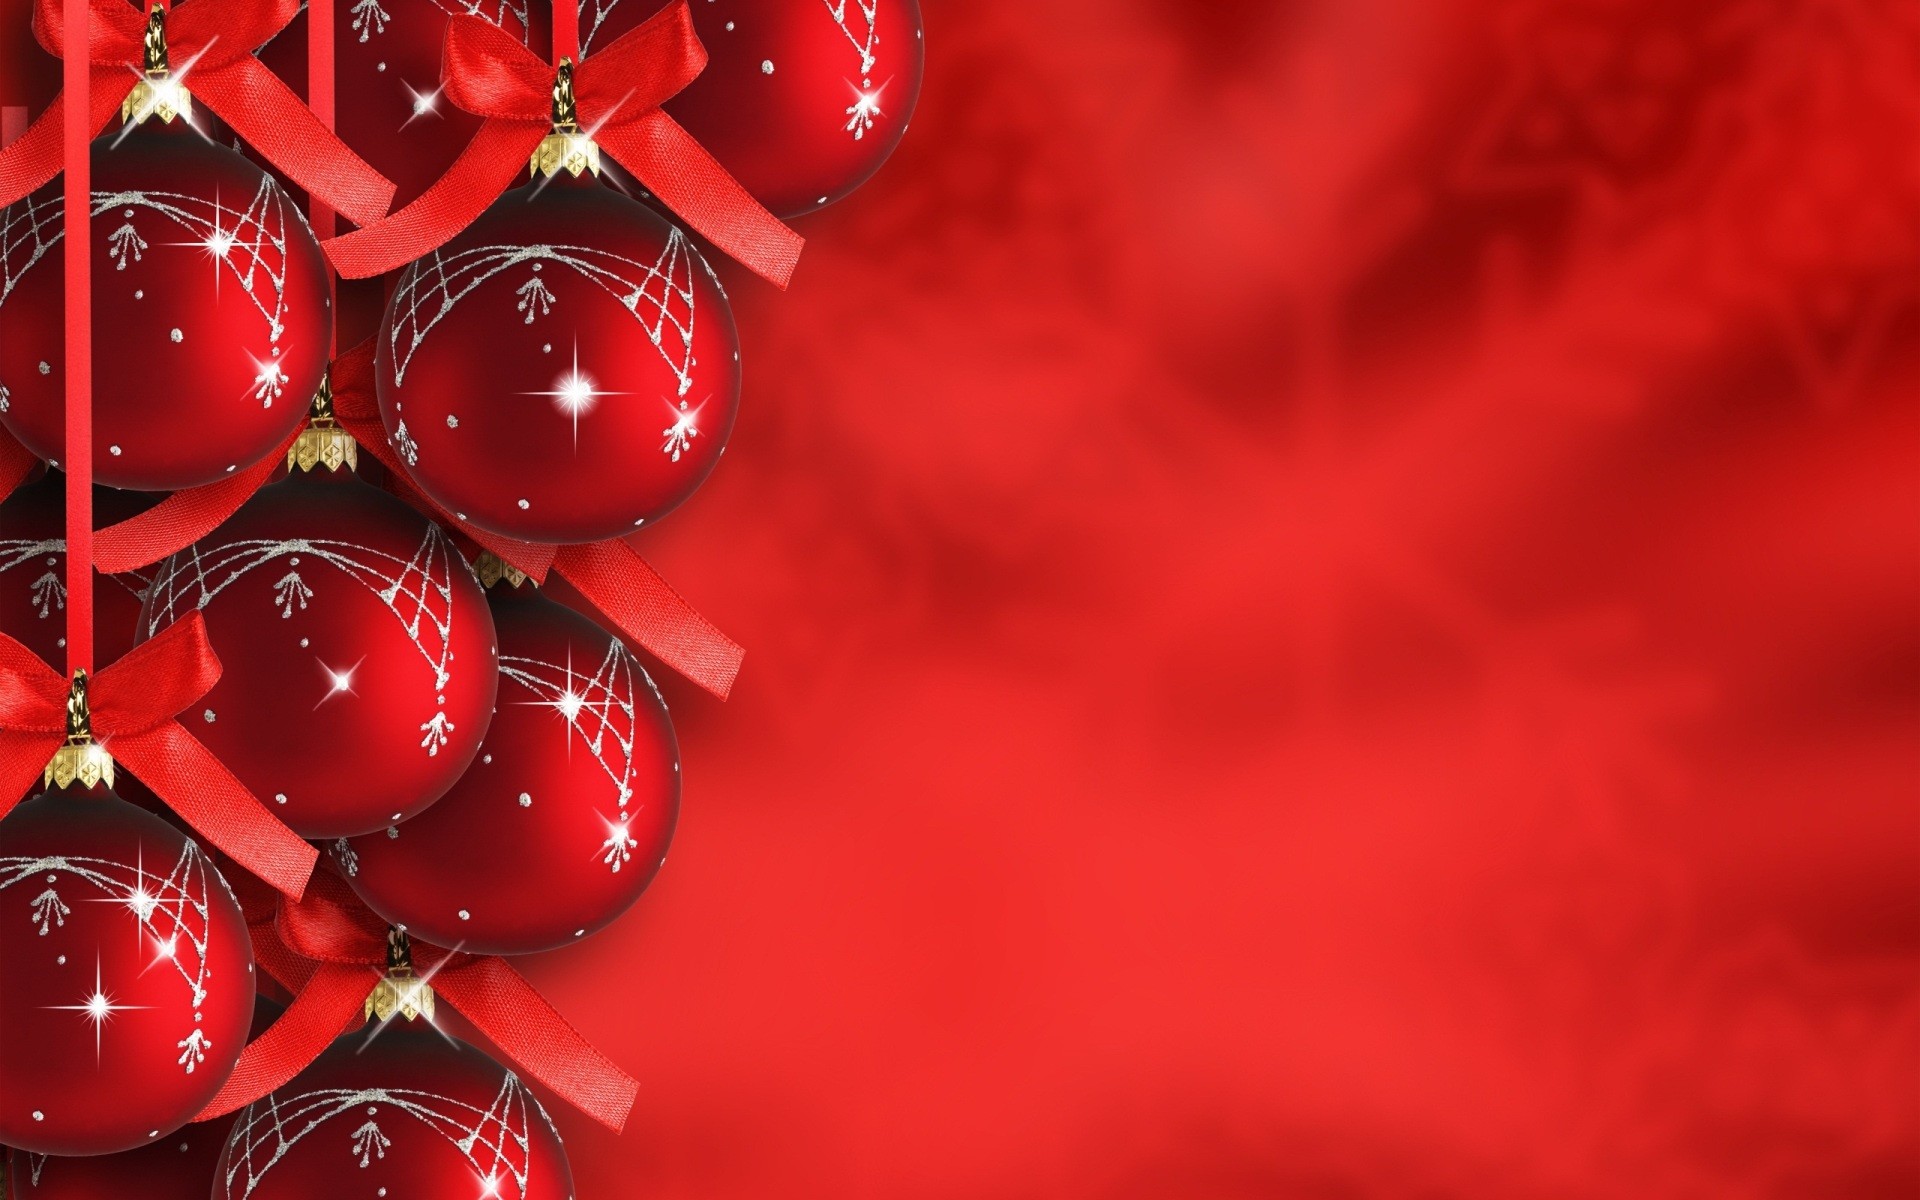 1920x1200 Christmas Background 2017 Cool Backgrounds 2017 6843wallpaper.gif